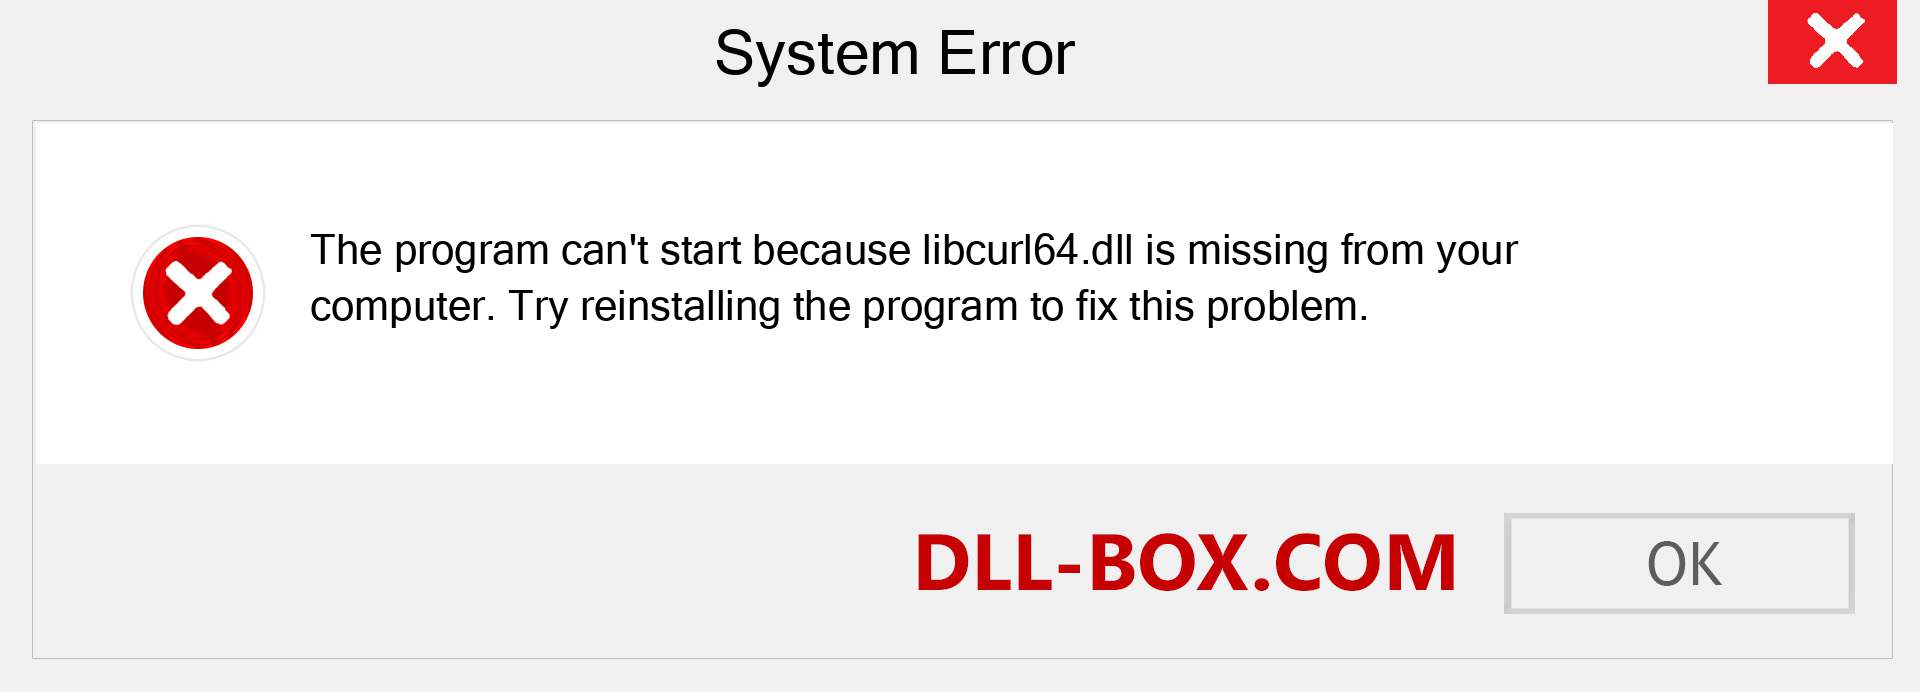  libcurl64.dll file is missing?. Download for Windows 7, 8, 10 - Fix  libcurl64 dll Missing Error on Windows, photos, images